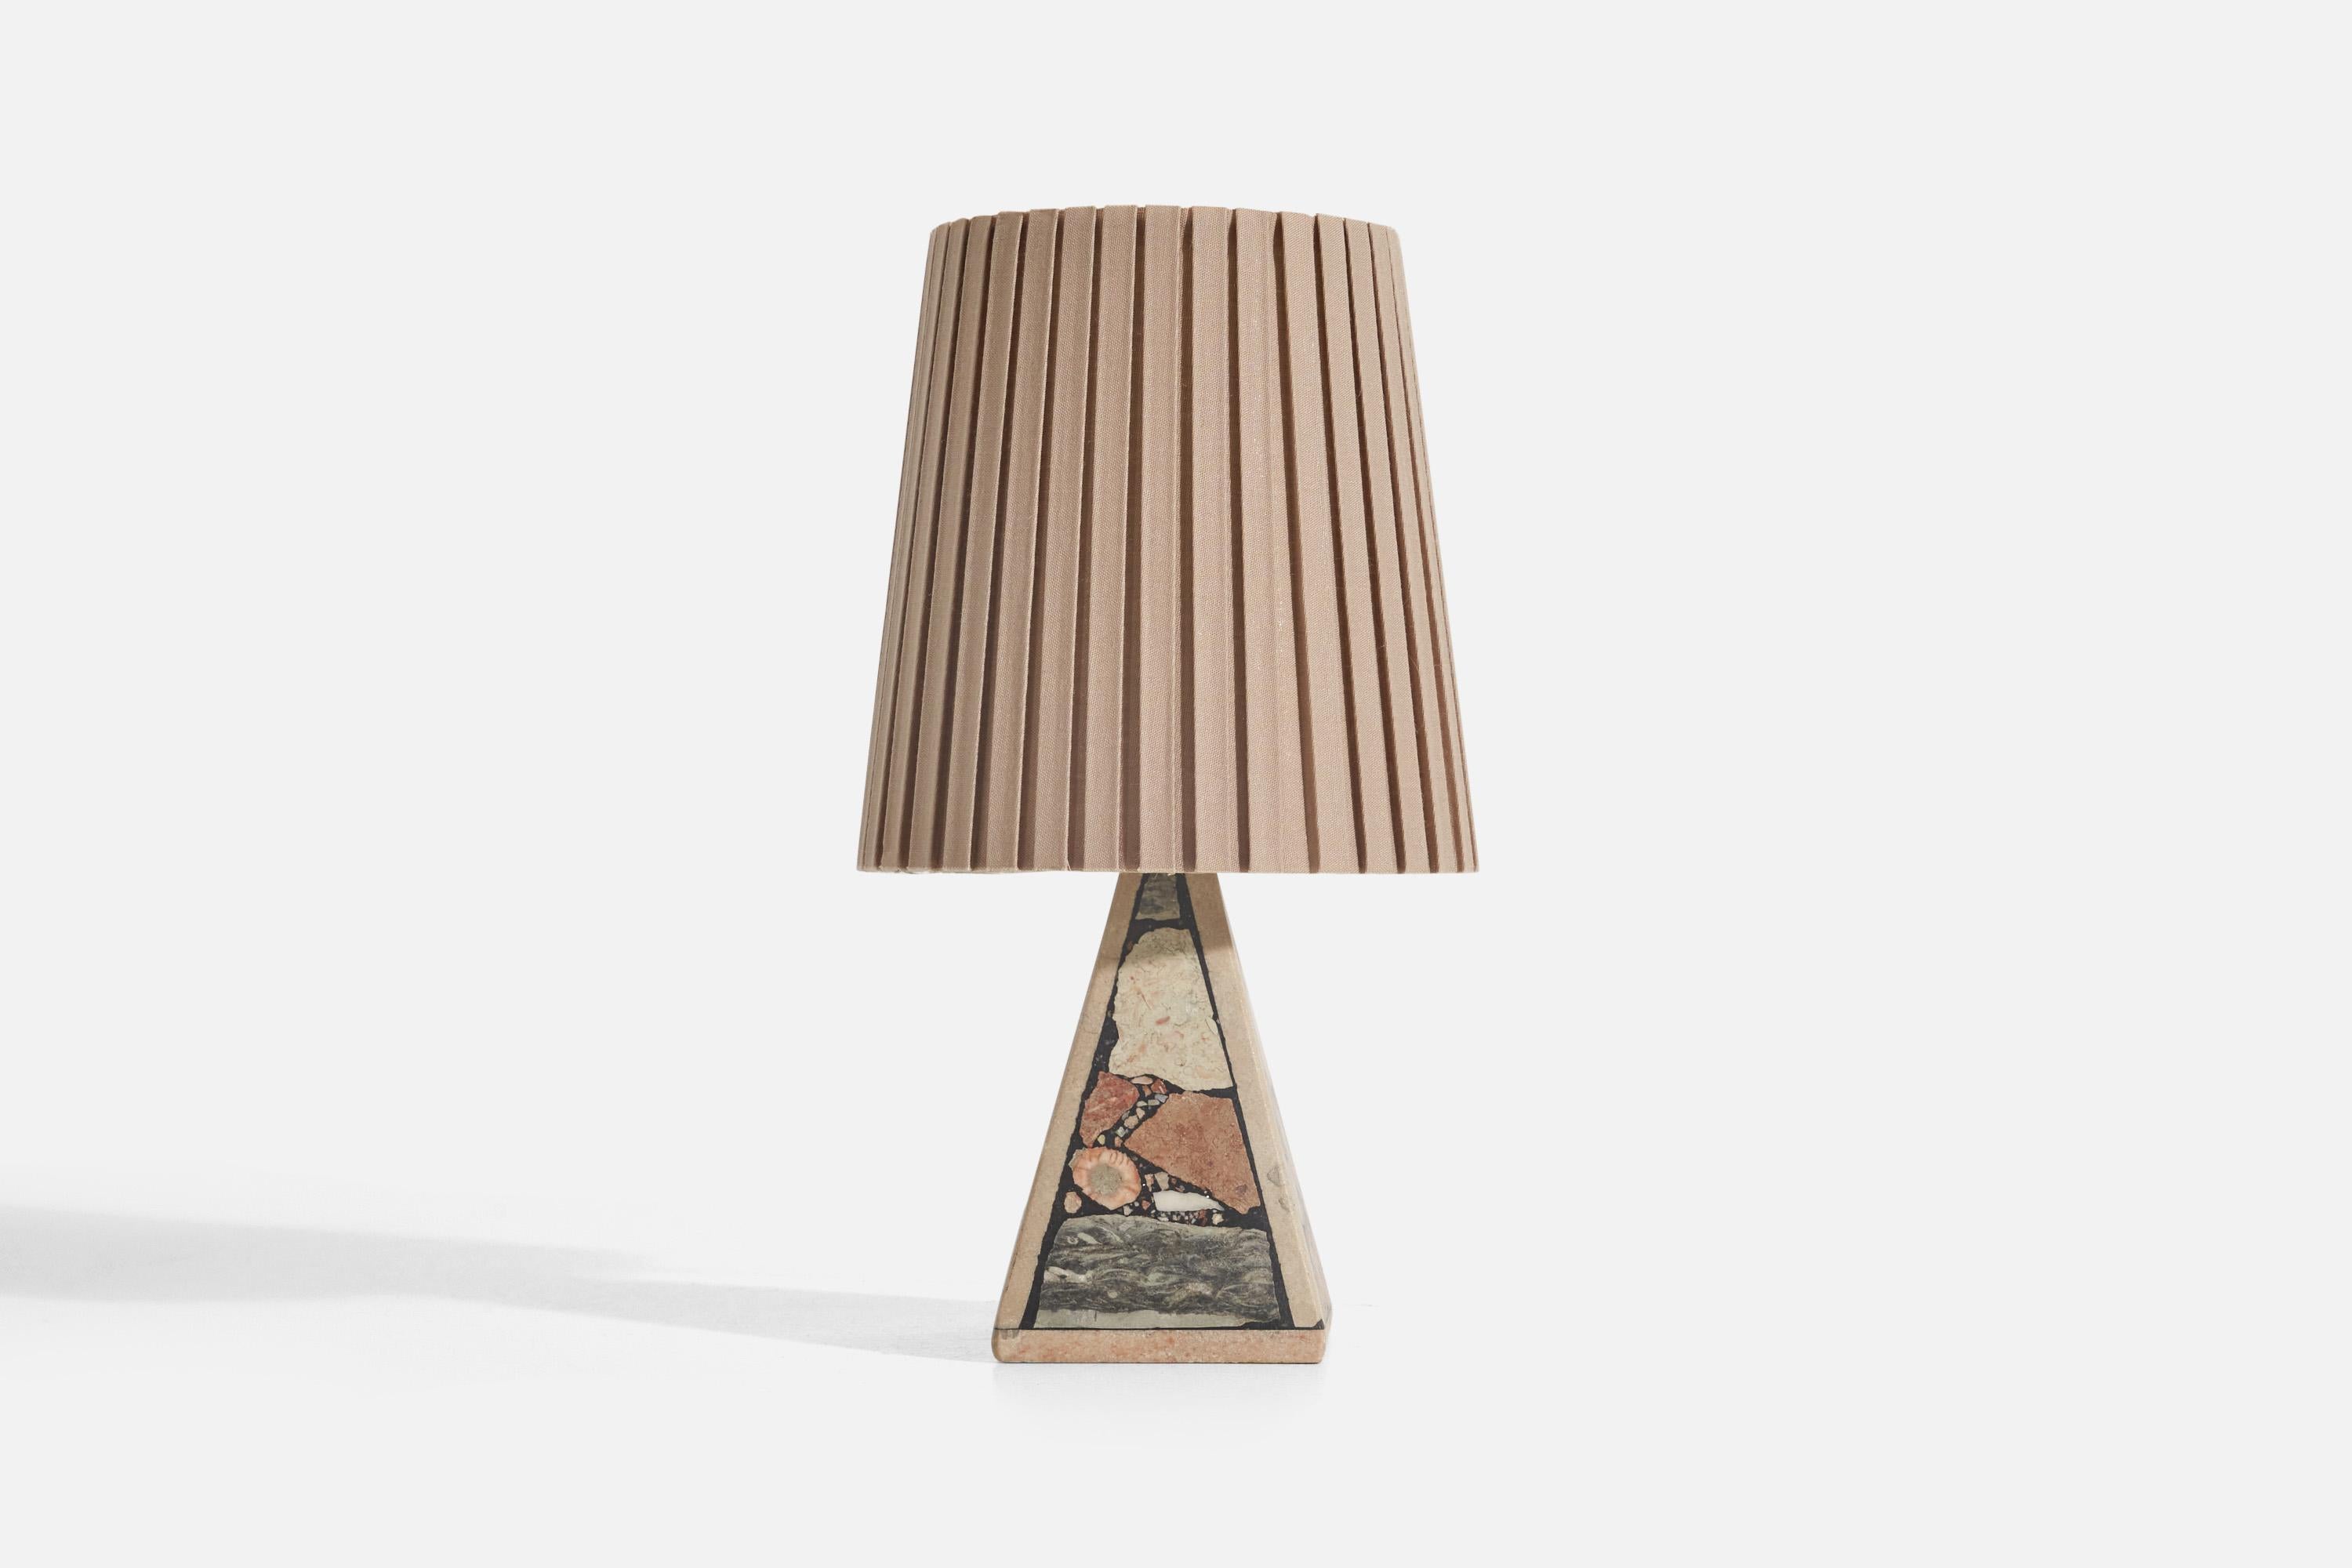 A solid stone table lamp with fossil pieces, Pietra Dura technique, designed and produced in Sweden, c. 1970s.

Sold with fabric Lampshade. 
Stated dimensions refer to the Lamp with the Shade. 

Socket takes E-14 bulb.

There is no maximum